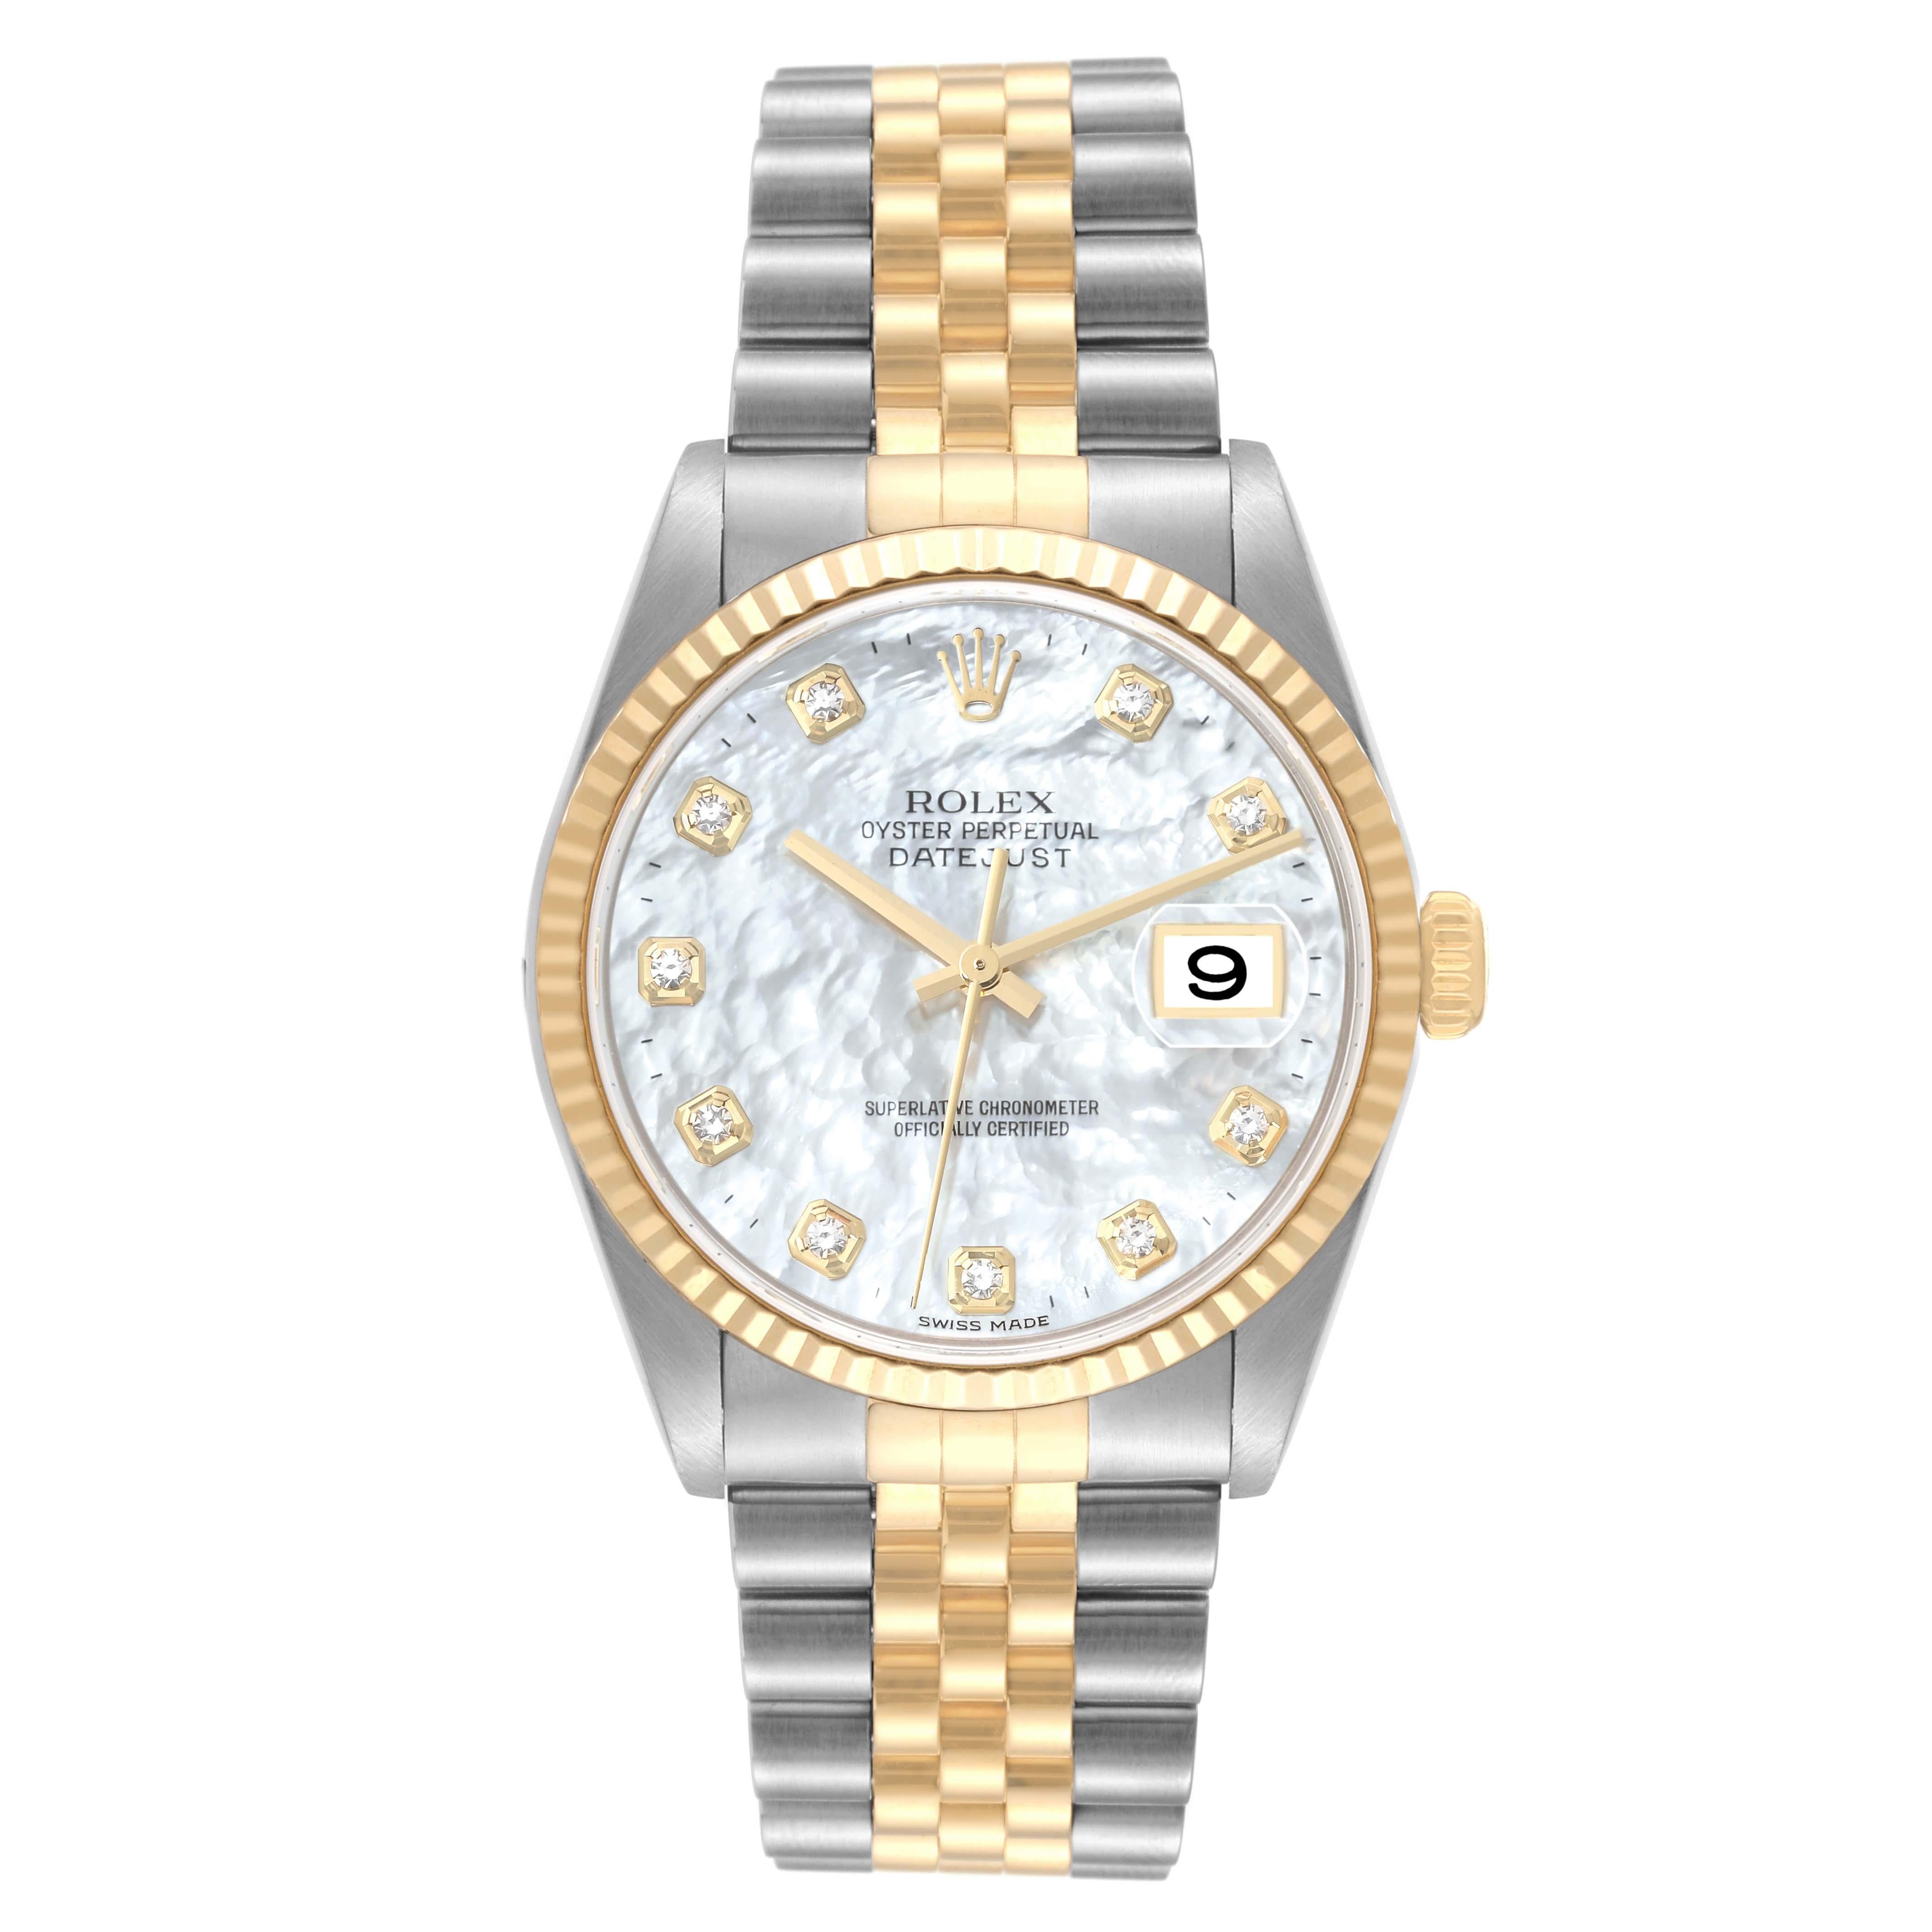 Rolex Datejust Steel Yellow Gold Mother Of Pearl Diamond Dial Mens Watch 16233. Officially certified chronometer automatic self-winding movement. Stainless steel case 36 mm in diameter.  Rolex logo on an 18K yellow gold crown. 18k yellow gold fluted